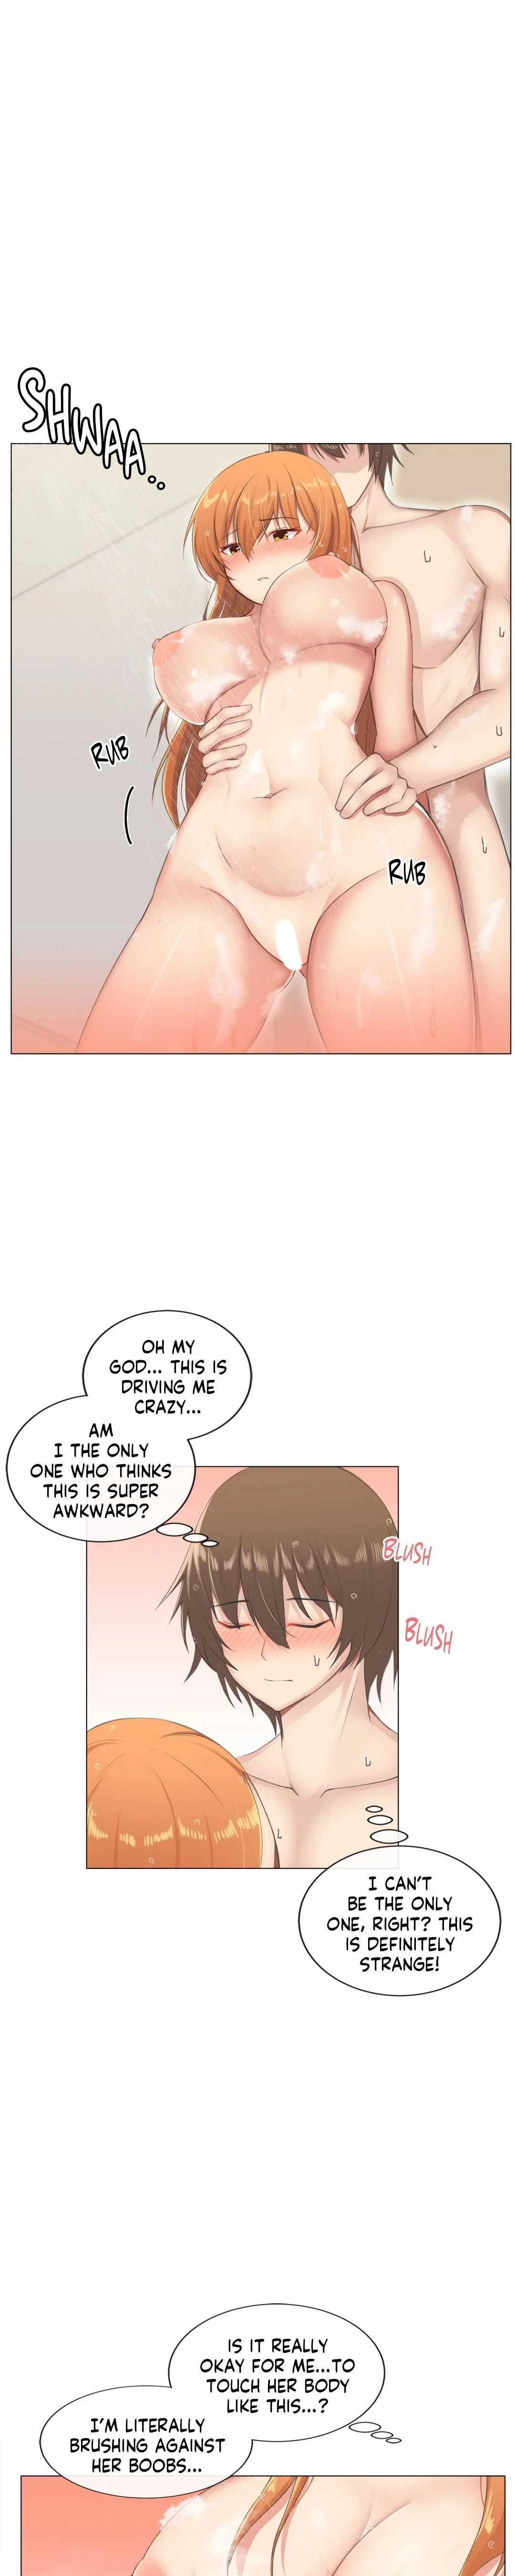 [Dumangoon, 130F] Sexcape Room: Pile Up Ch.9/9 [English] [Manhwa PDF] Completed 78